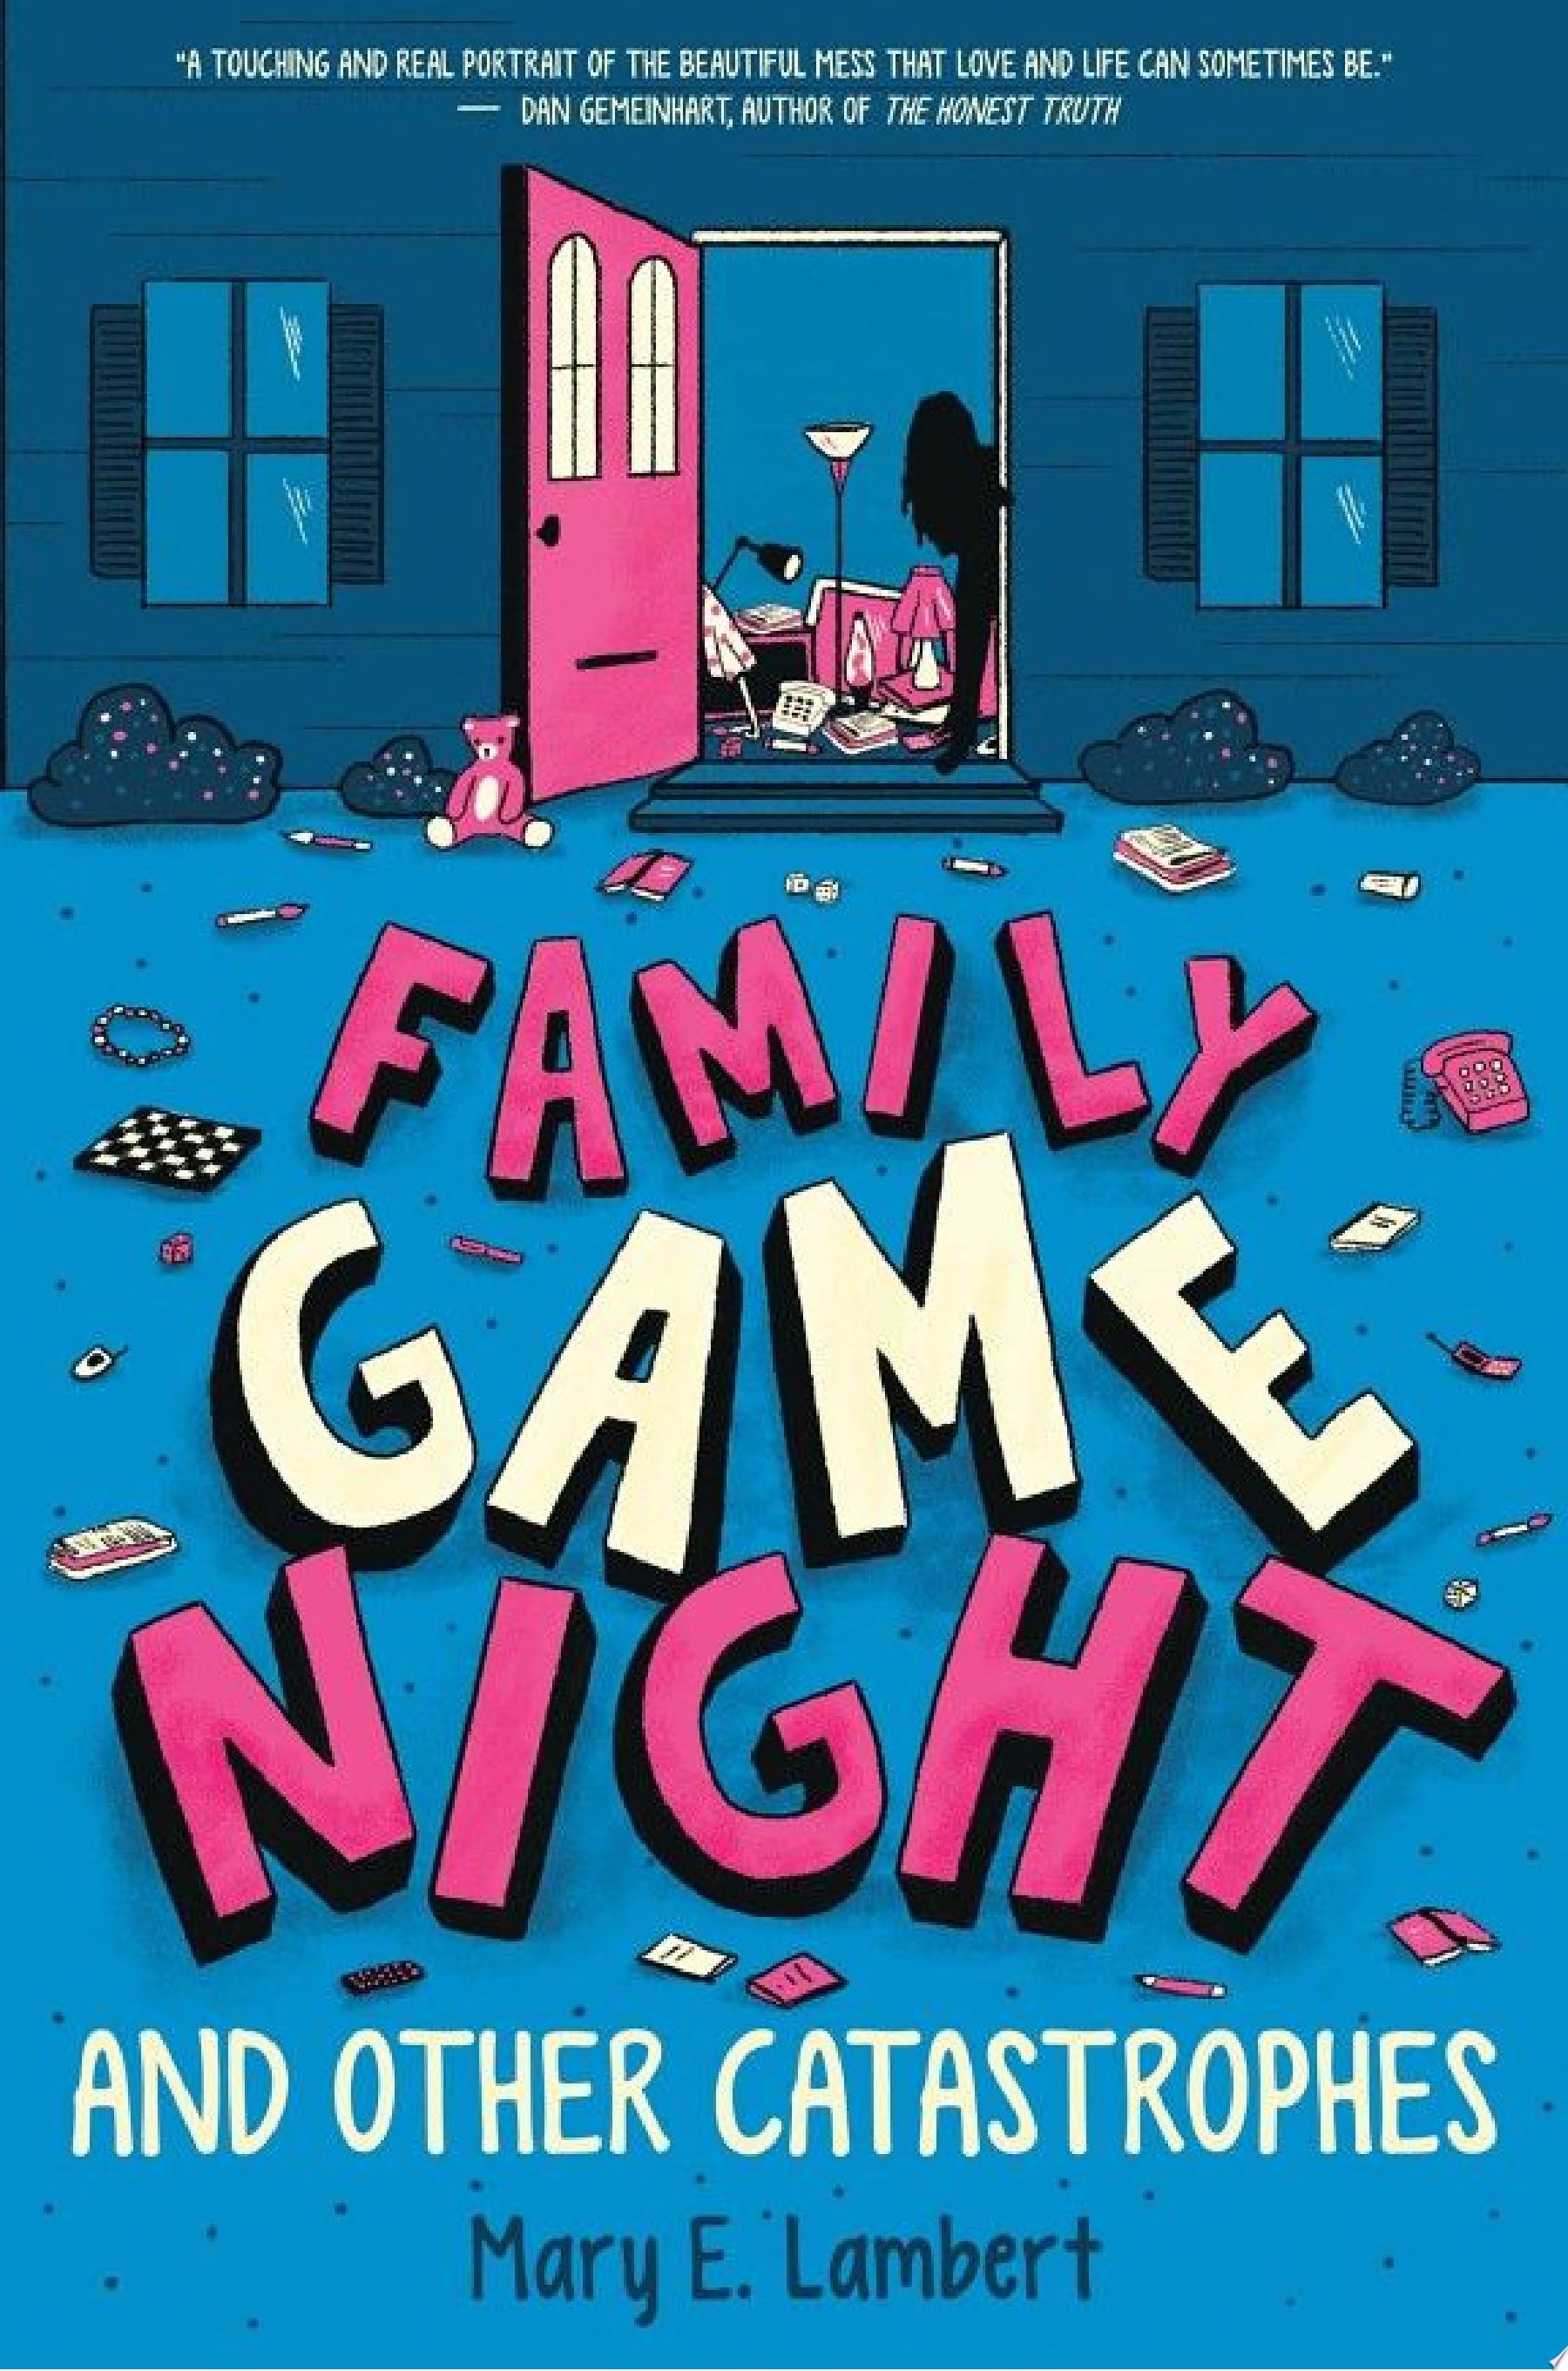 Image for "Family Game Night and Other Catastrophes"